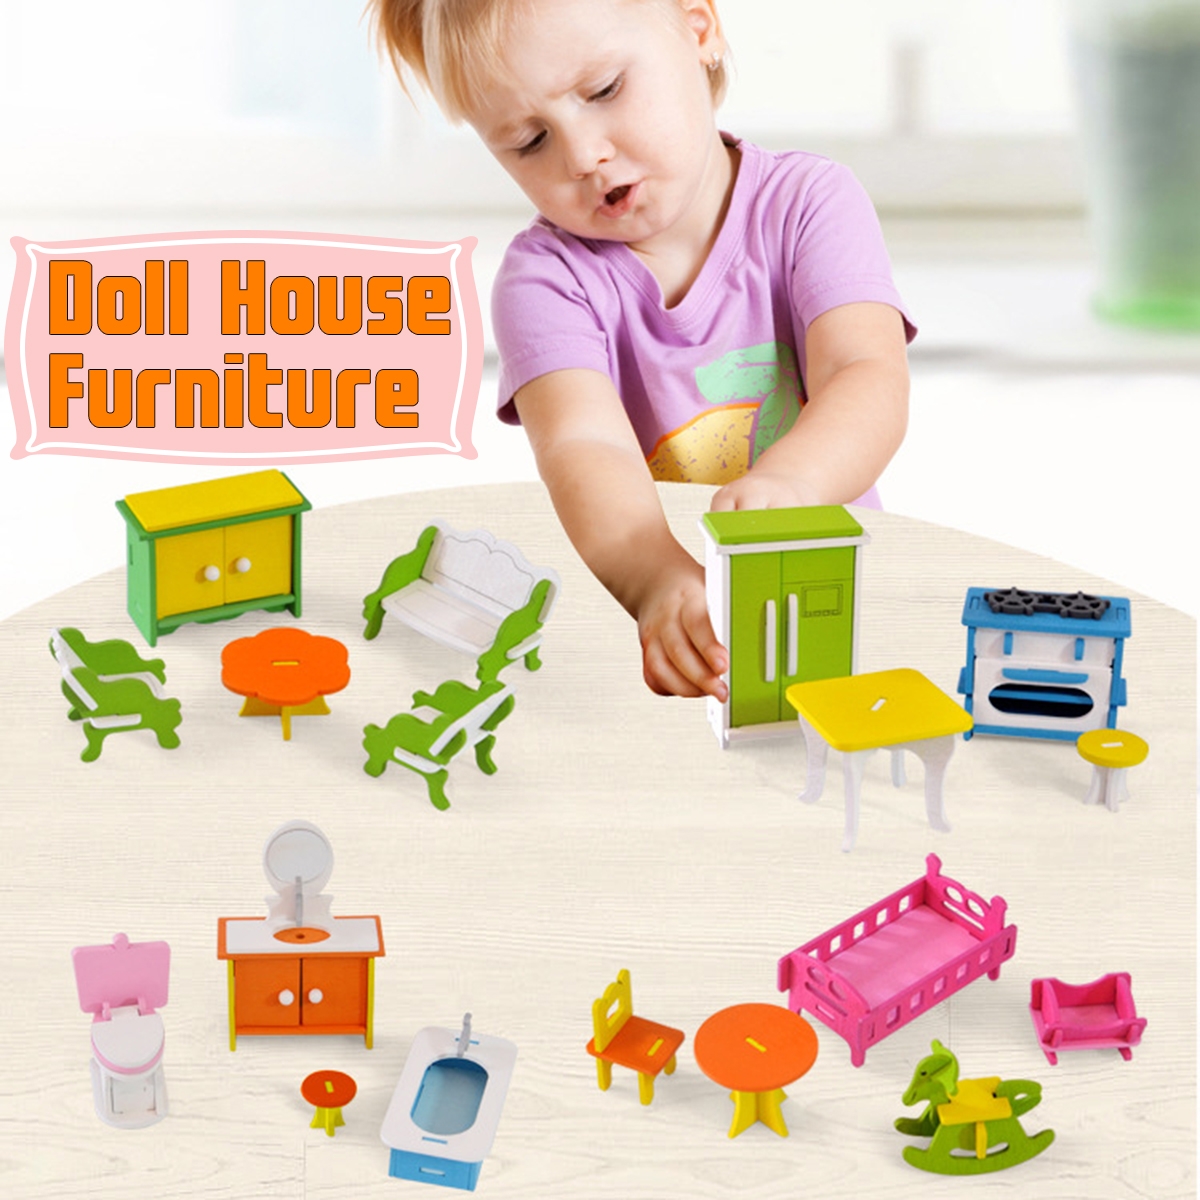 Wooden Colorful DIY Assembly Doll House Furniture Kit Early Educational Learning Toys for Kids Gift